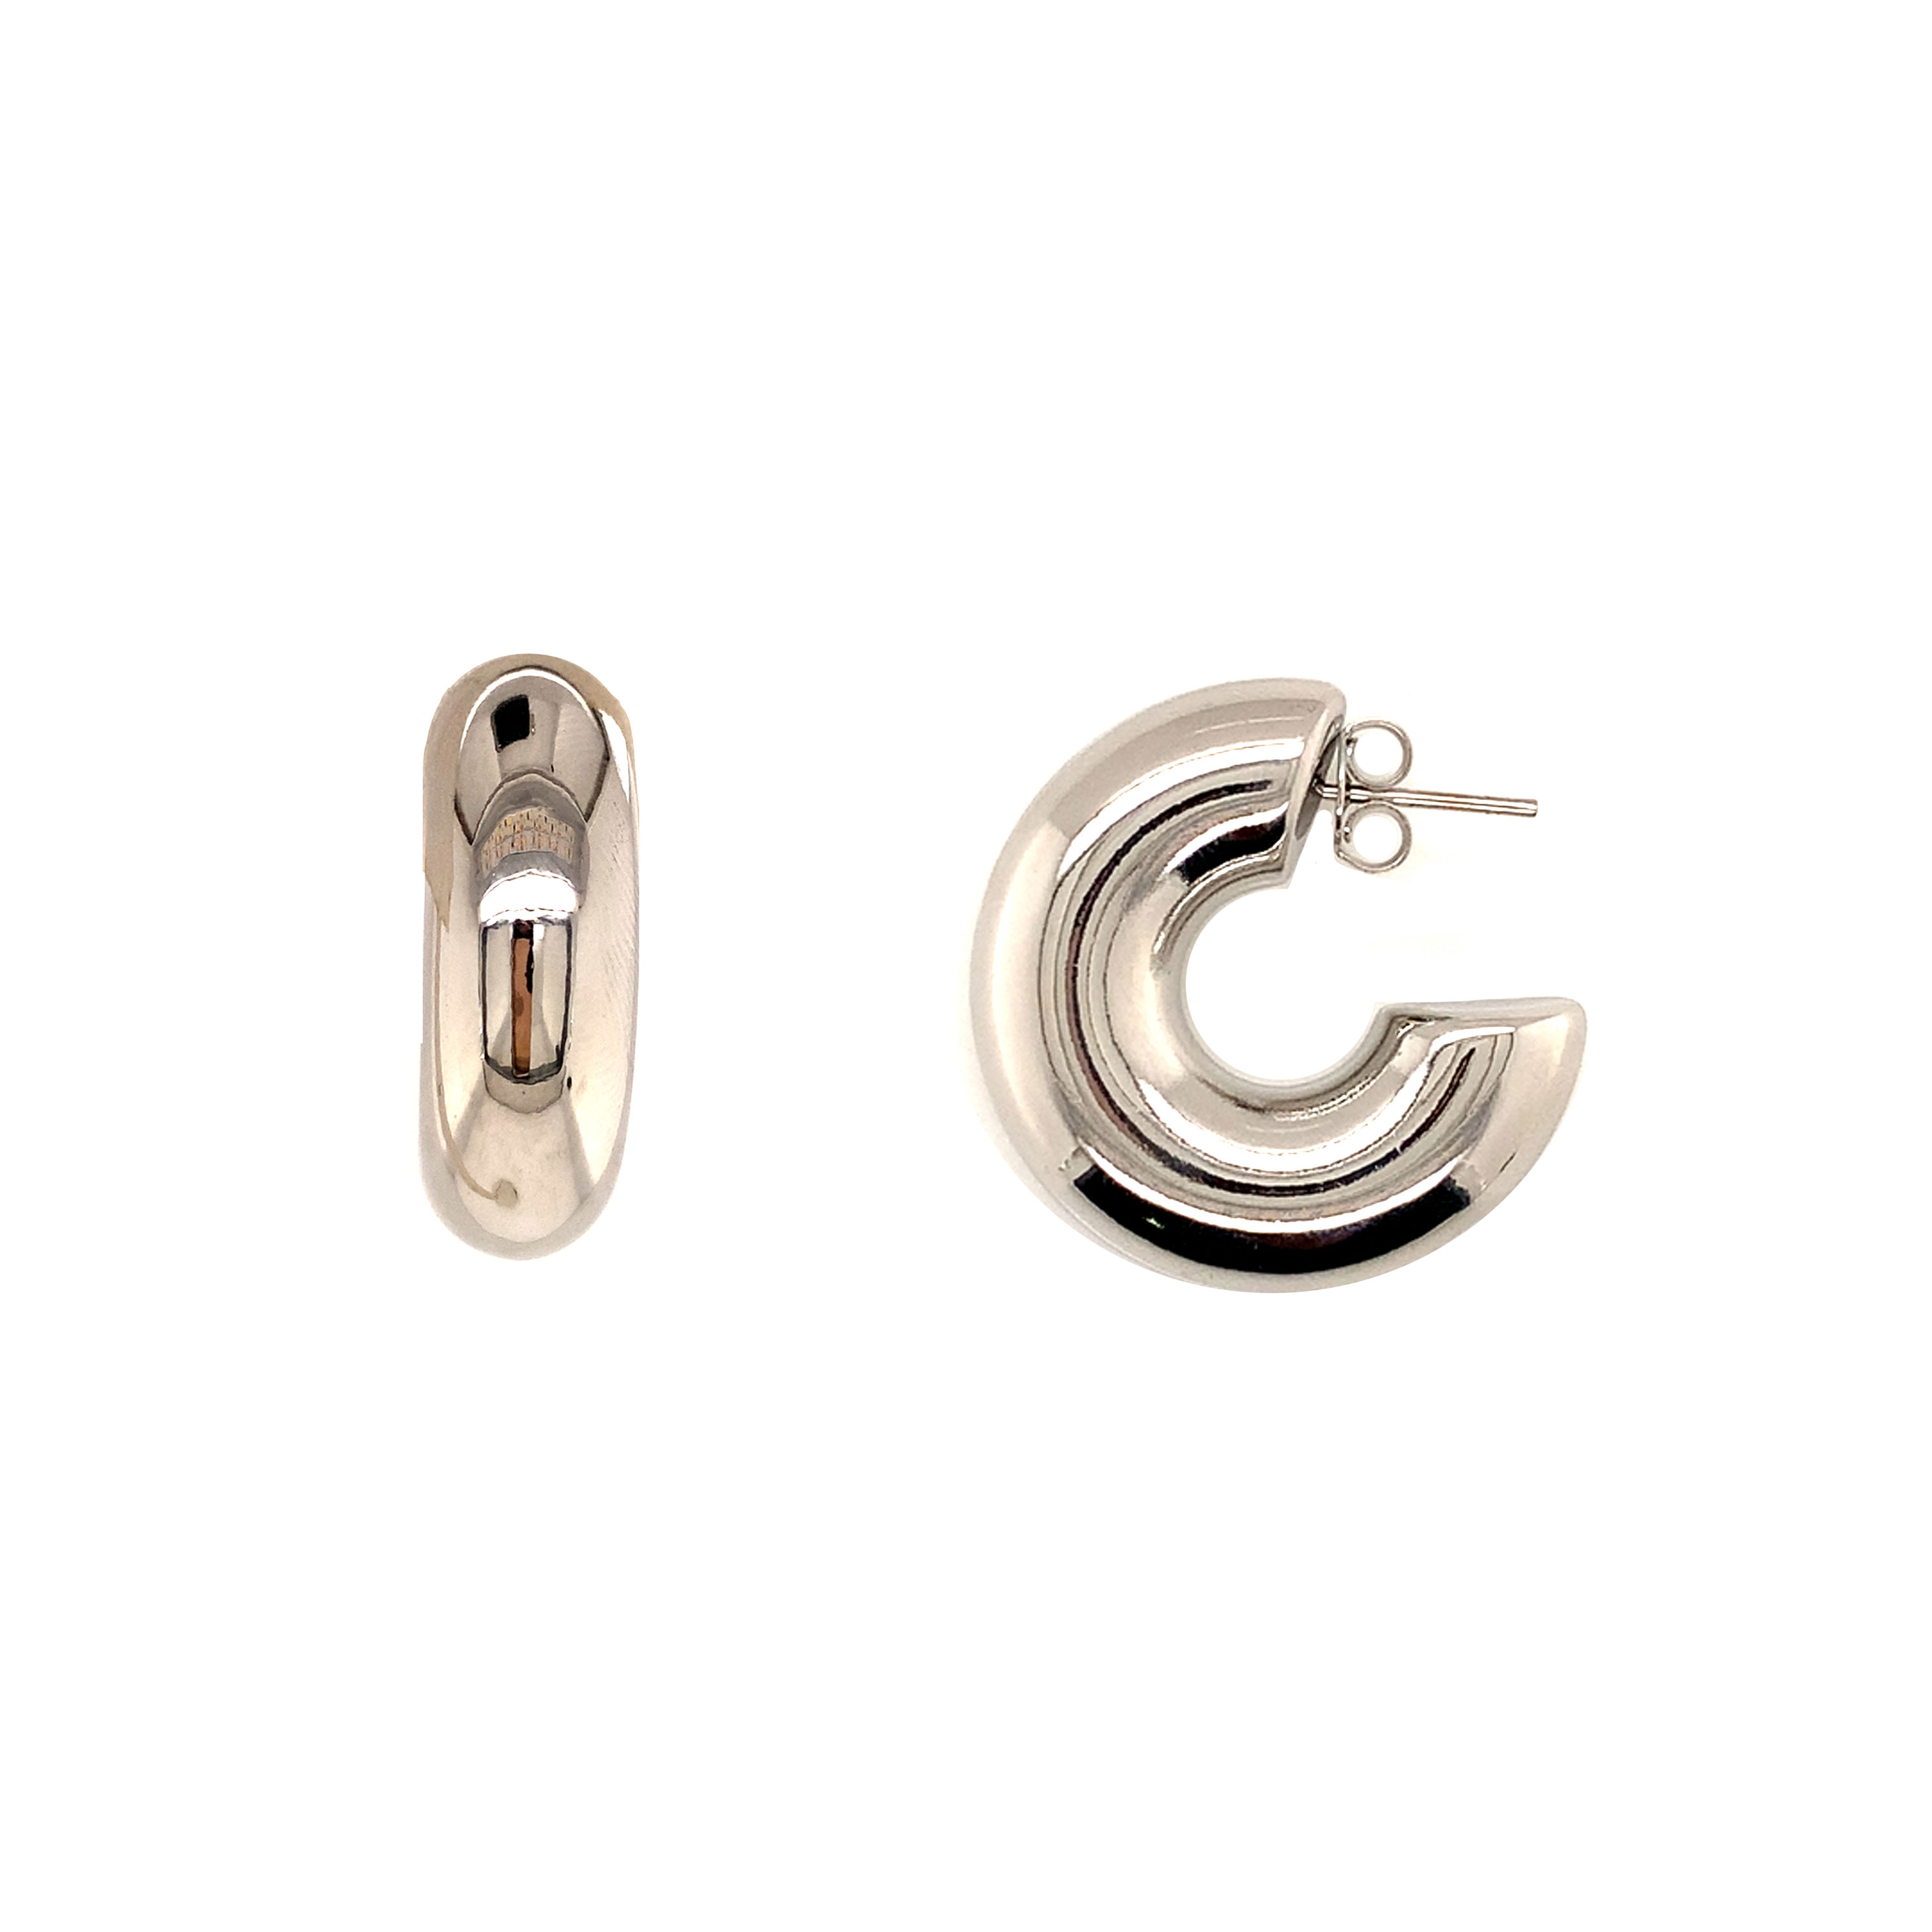 9.5 x 30mm Hoops - Silver Plated